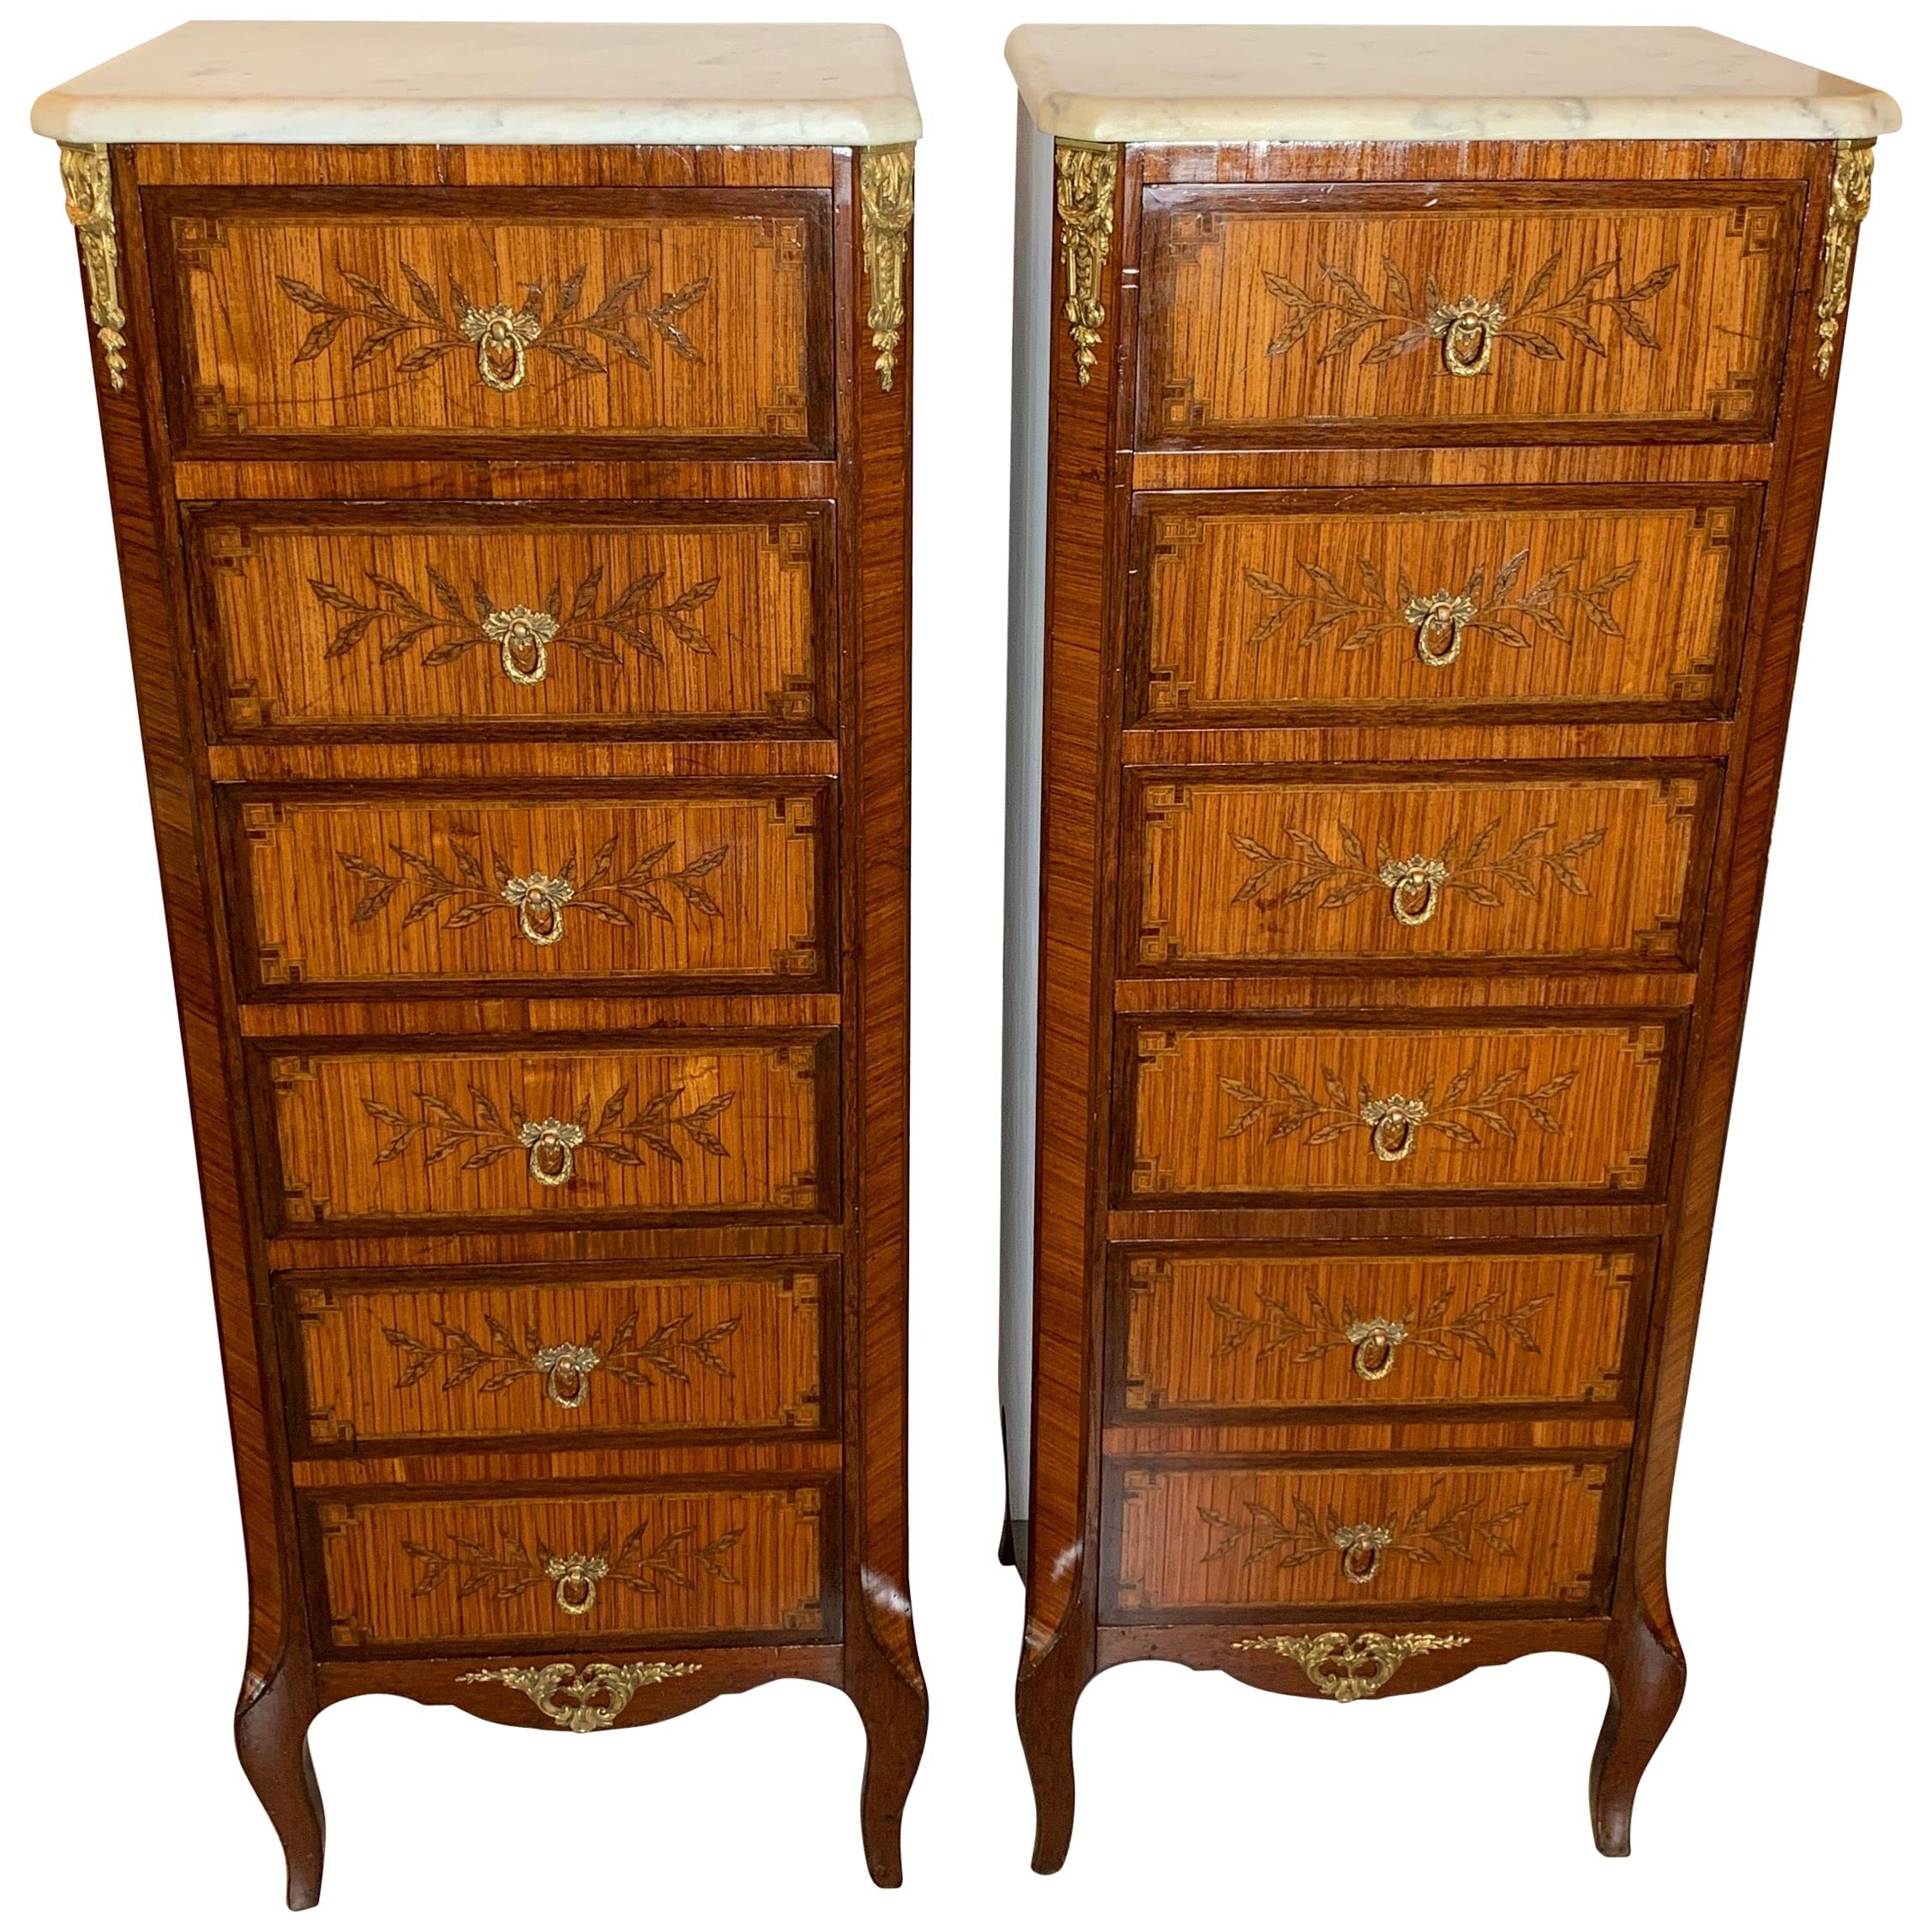 Pair of French Louis XVI Style Lingerie Chests